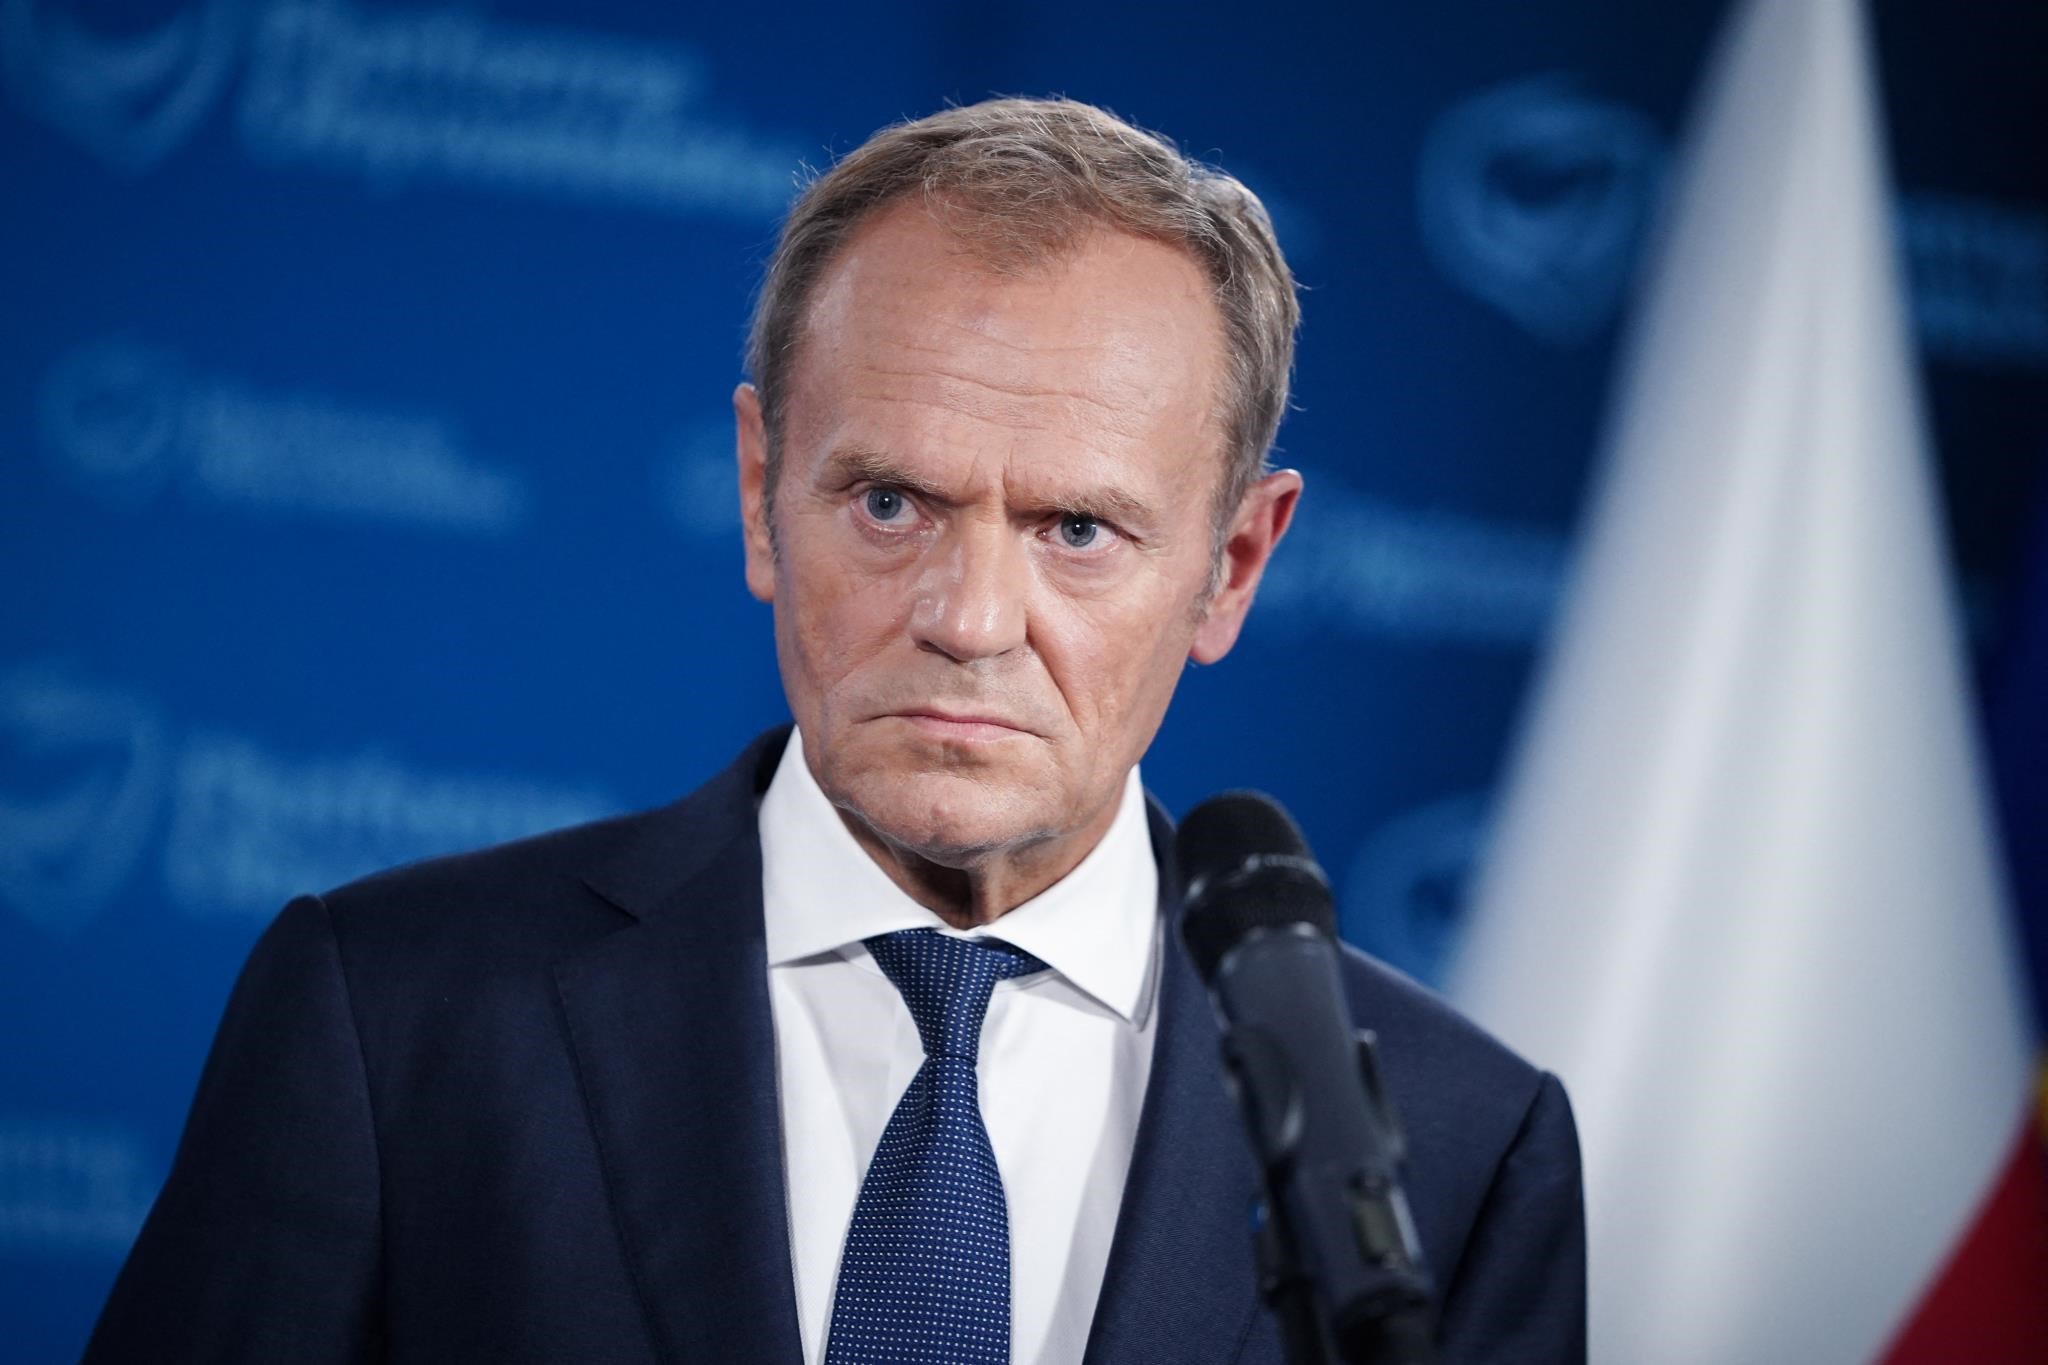 Scientist: Donald Tusk: I want to restore the rule of law